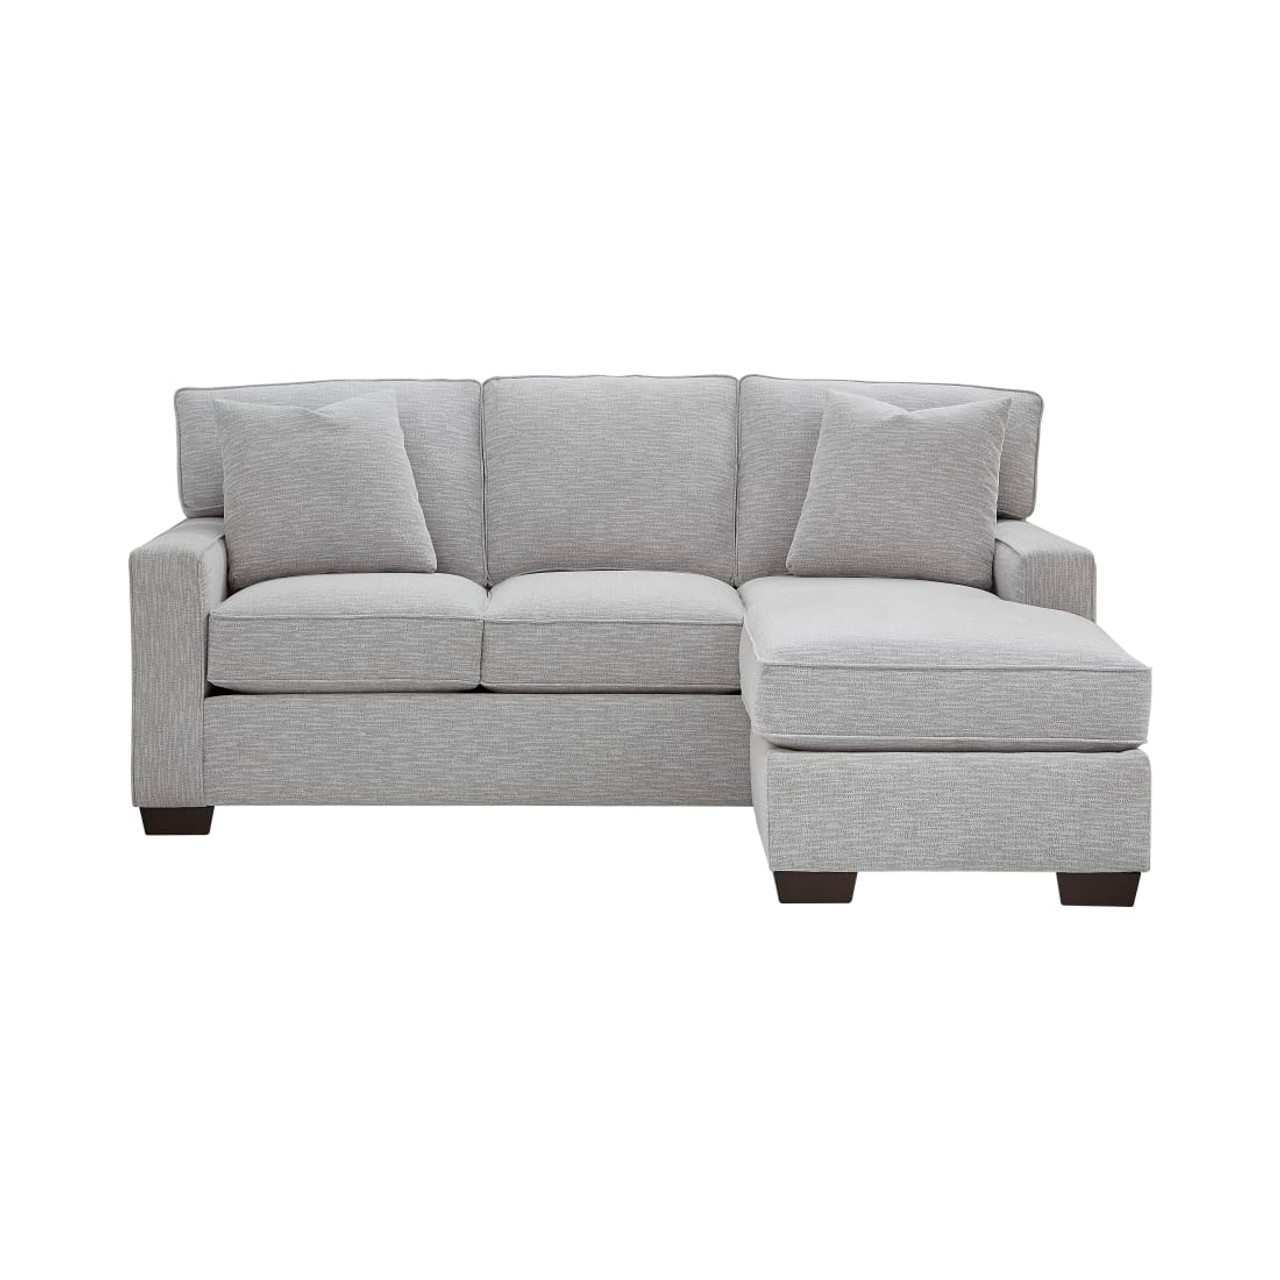 Buy Crestview Track Arm Granite Sofa Chaise | Financing Options @ Conn ...